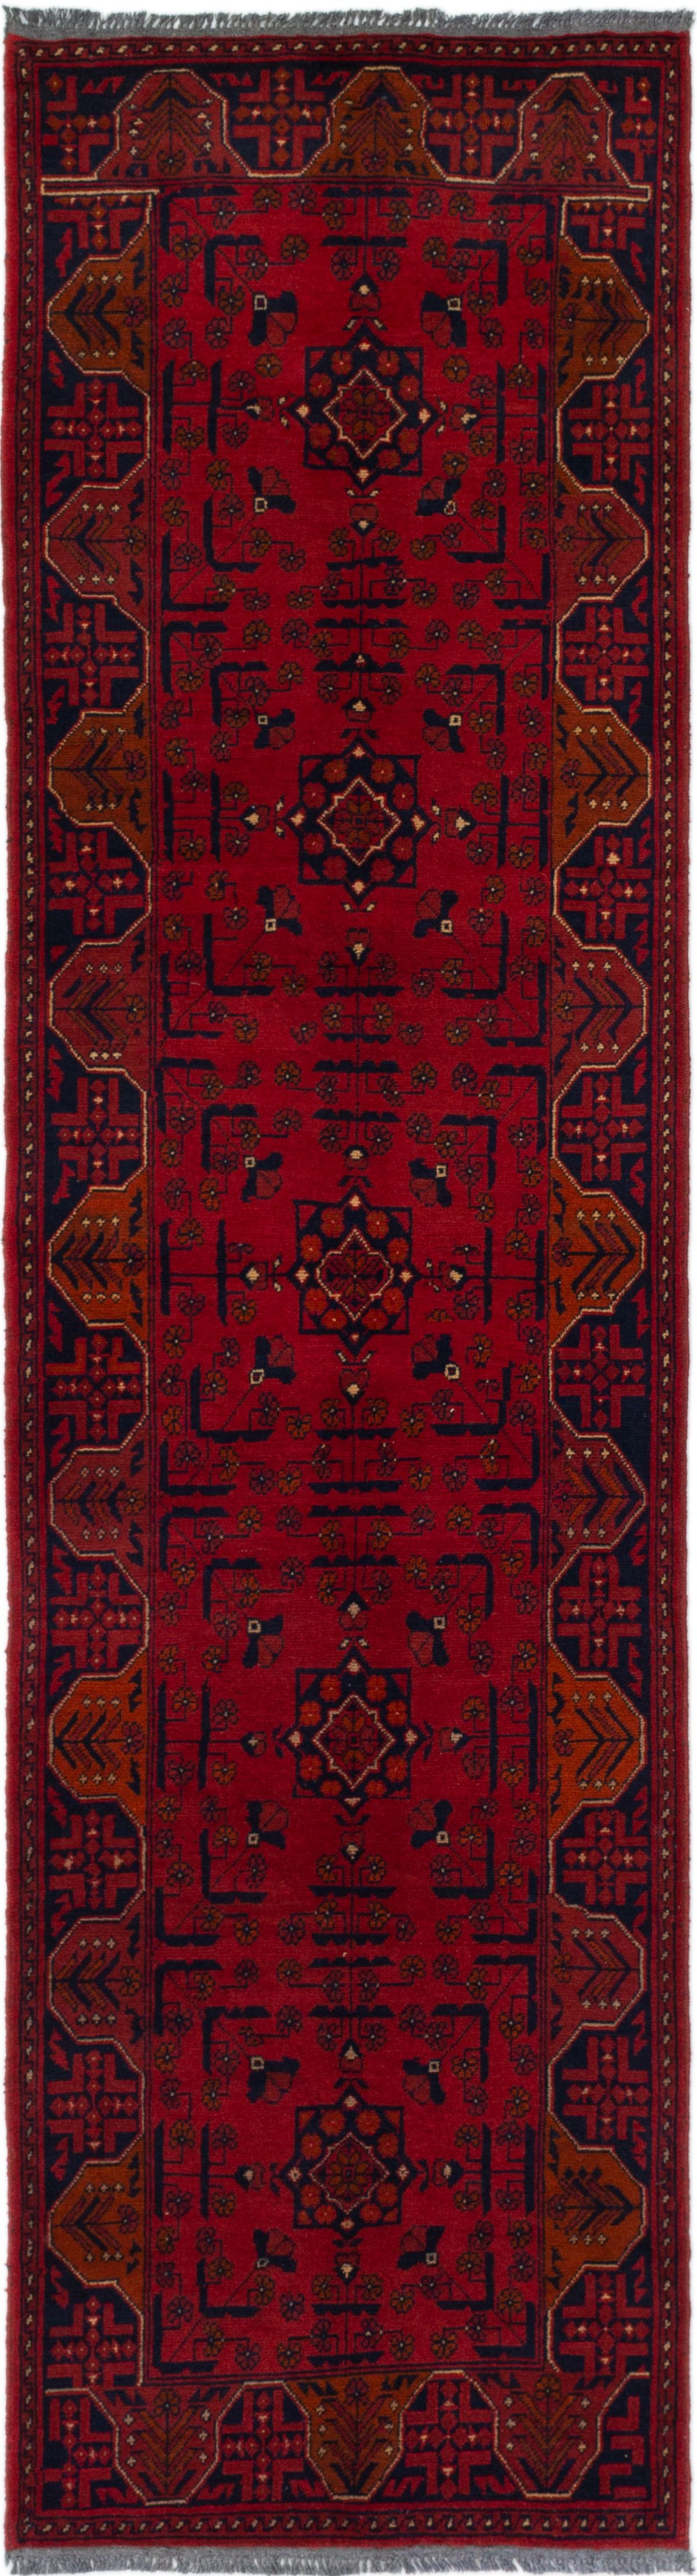 Hand-knotted Finest Khal Mohammadi Red Wool Rug 2'7" x 9'6" (19) Size: 2'7" x 9'6"  